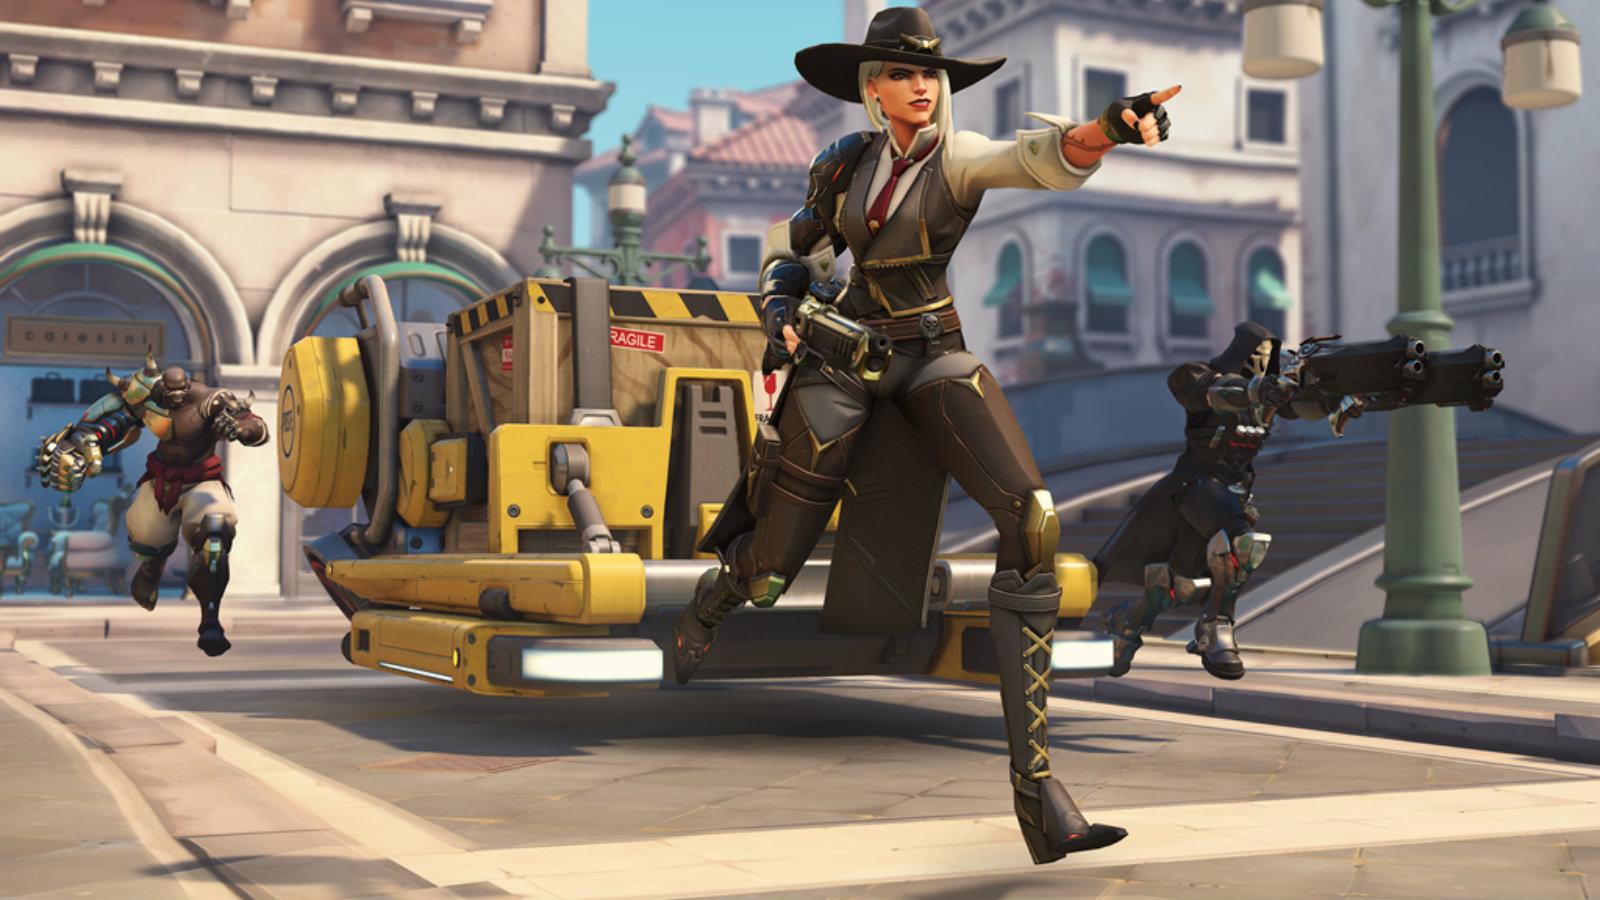 Ashe leads her team on Rialto